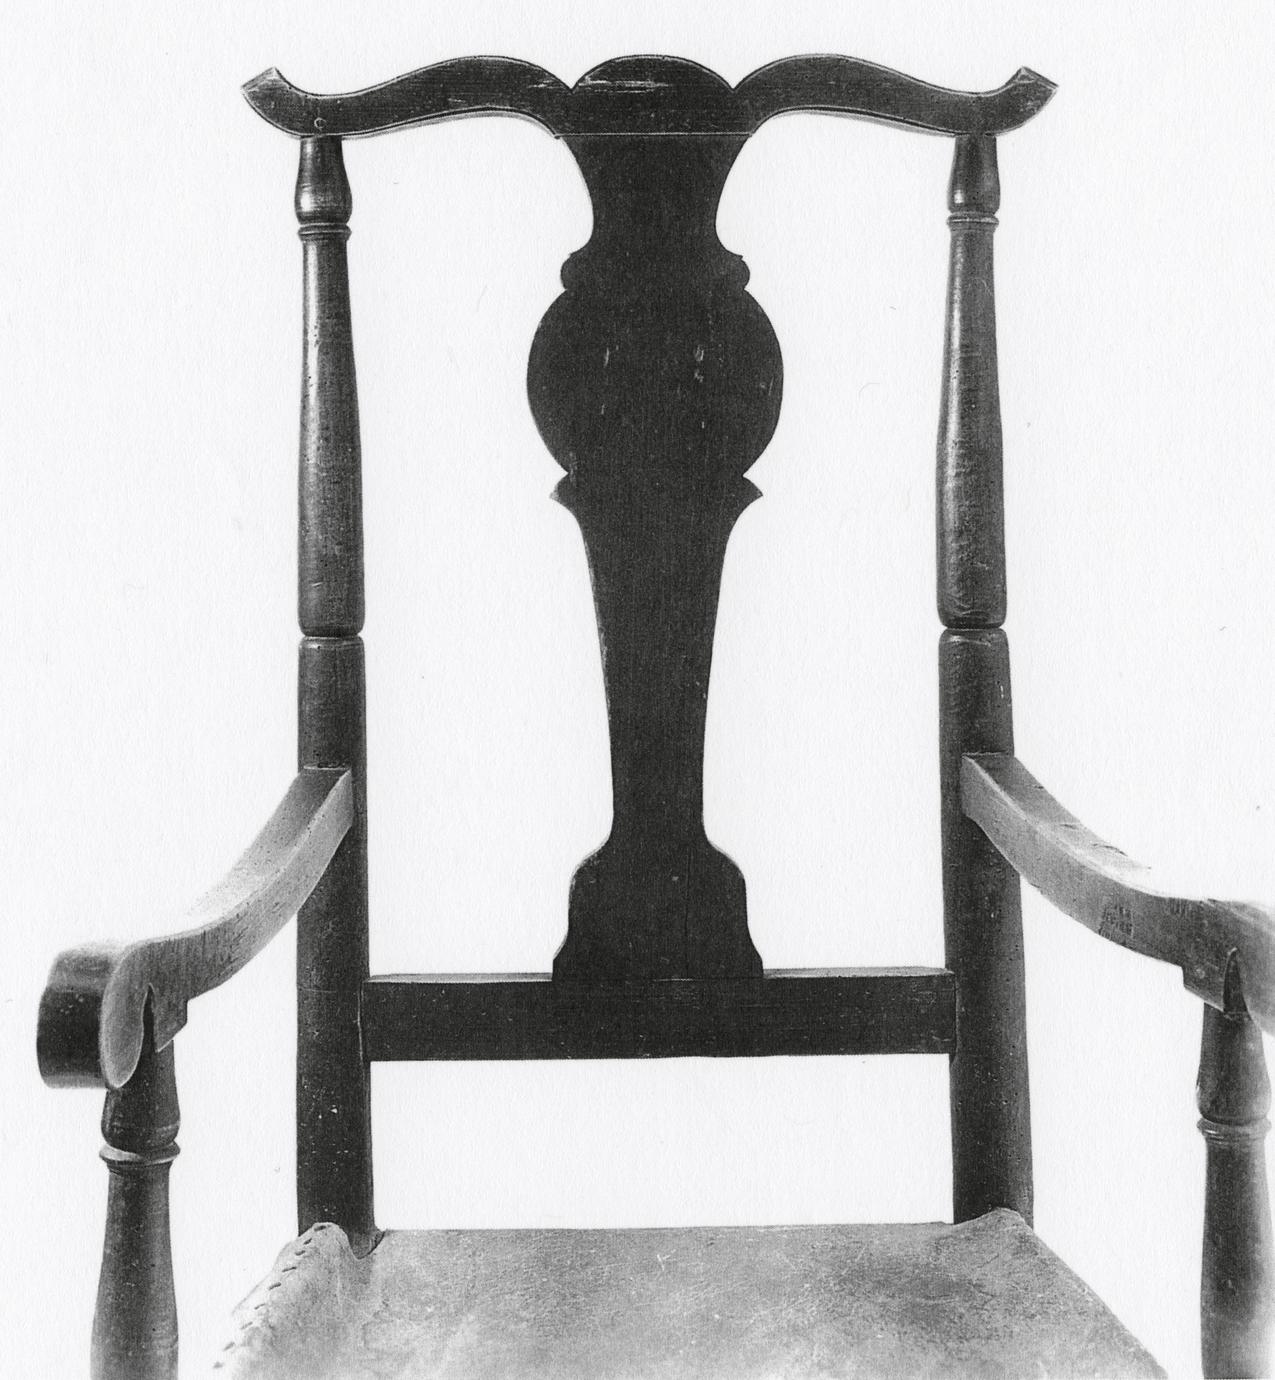 Black and white photograph of a fiddle-back armchair with rockers.